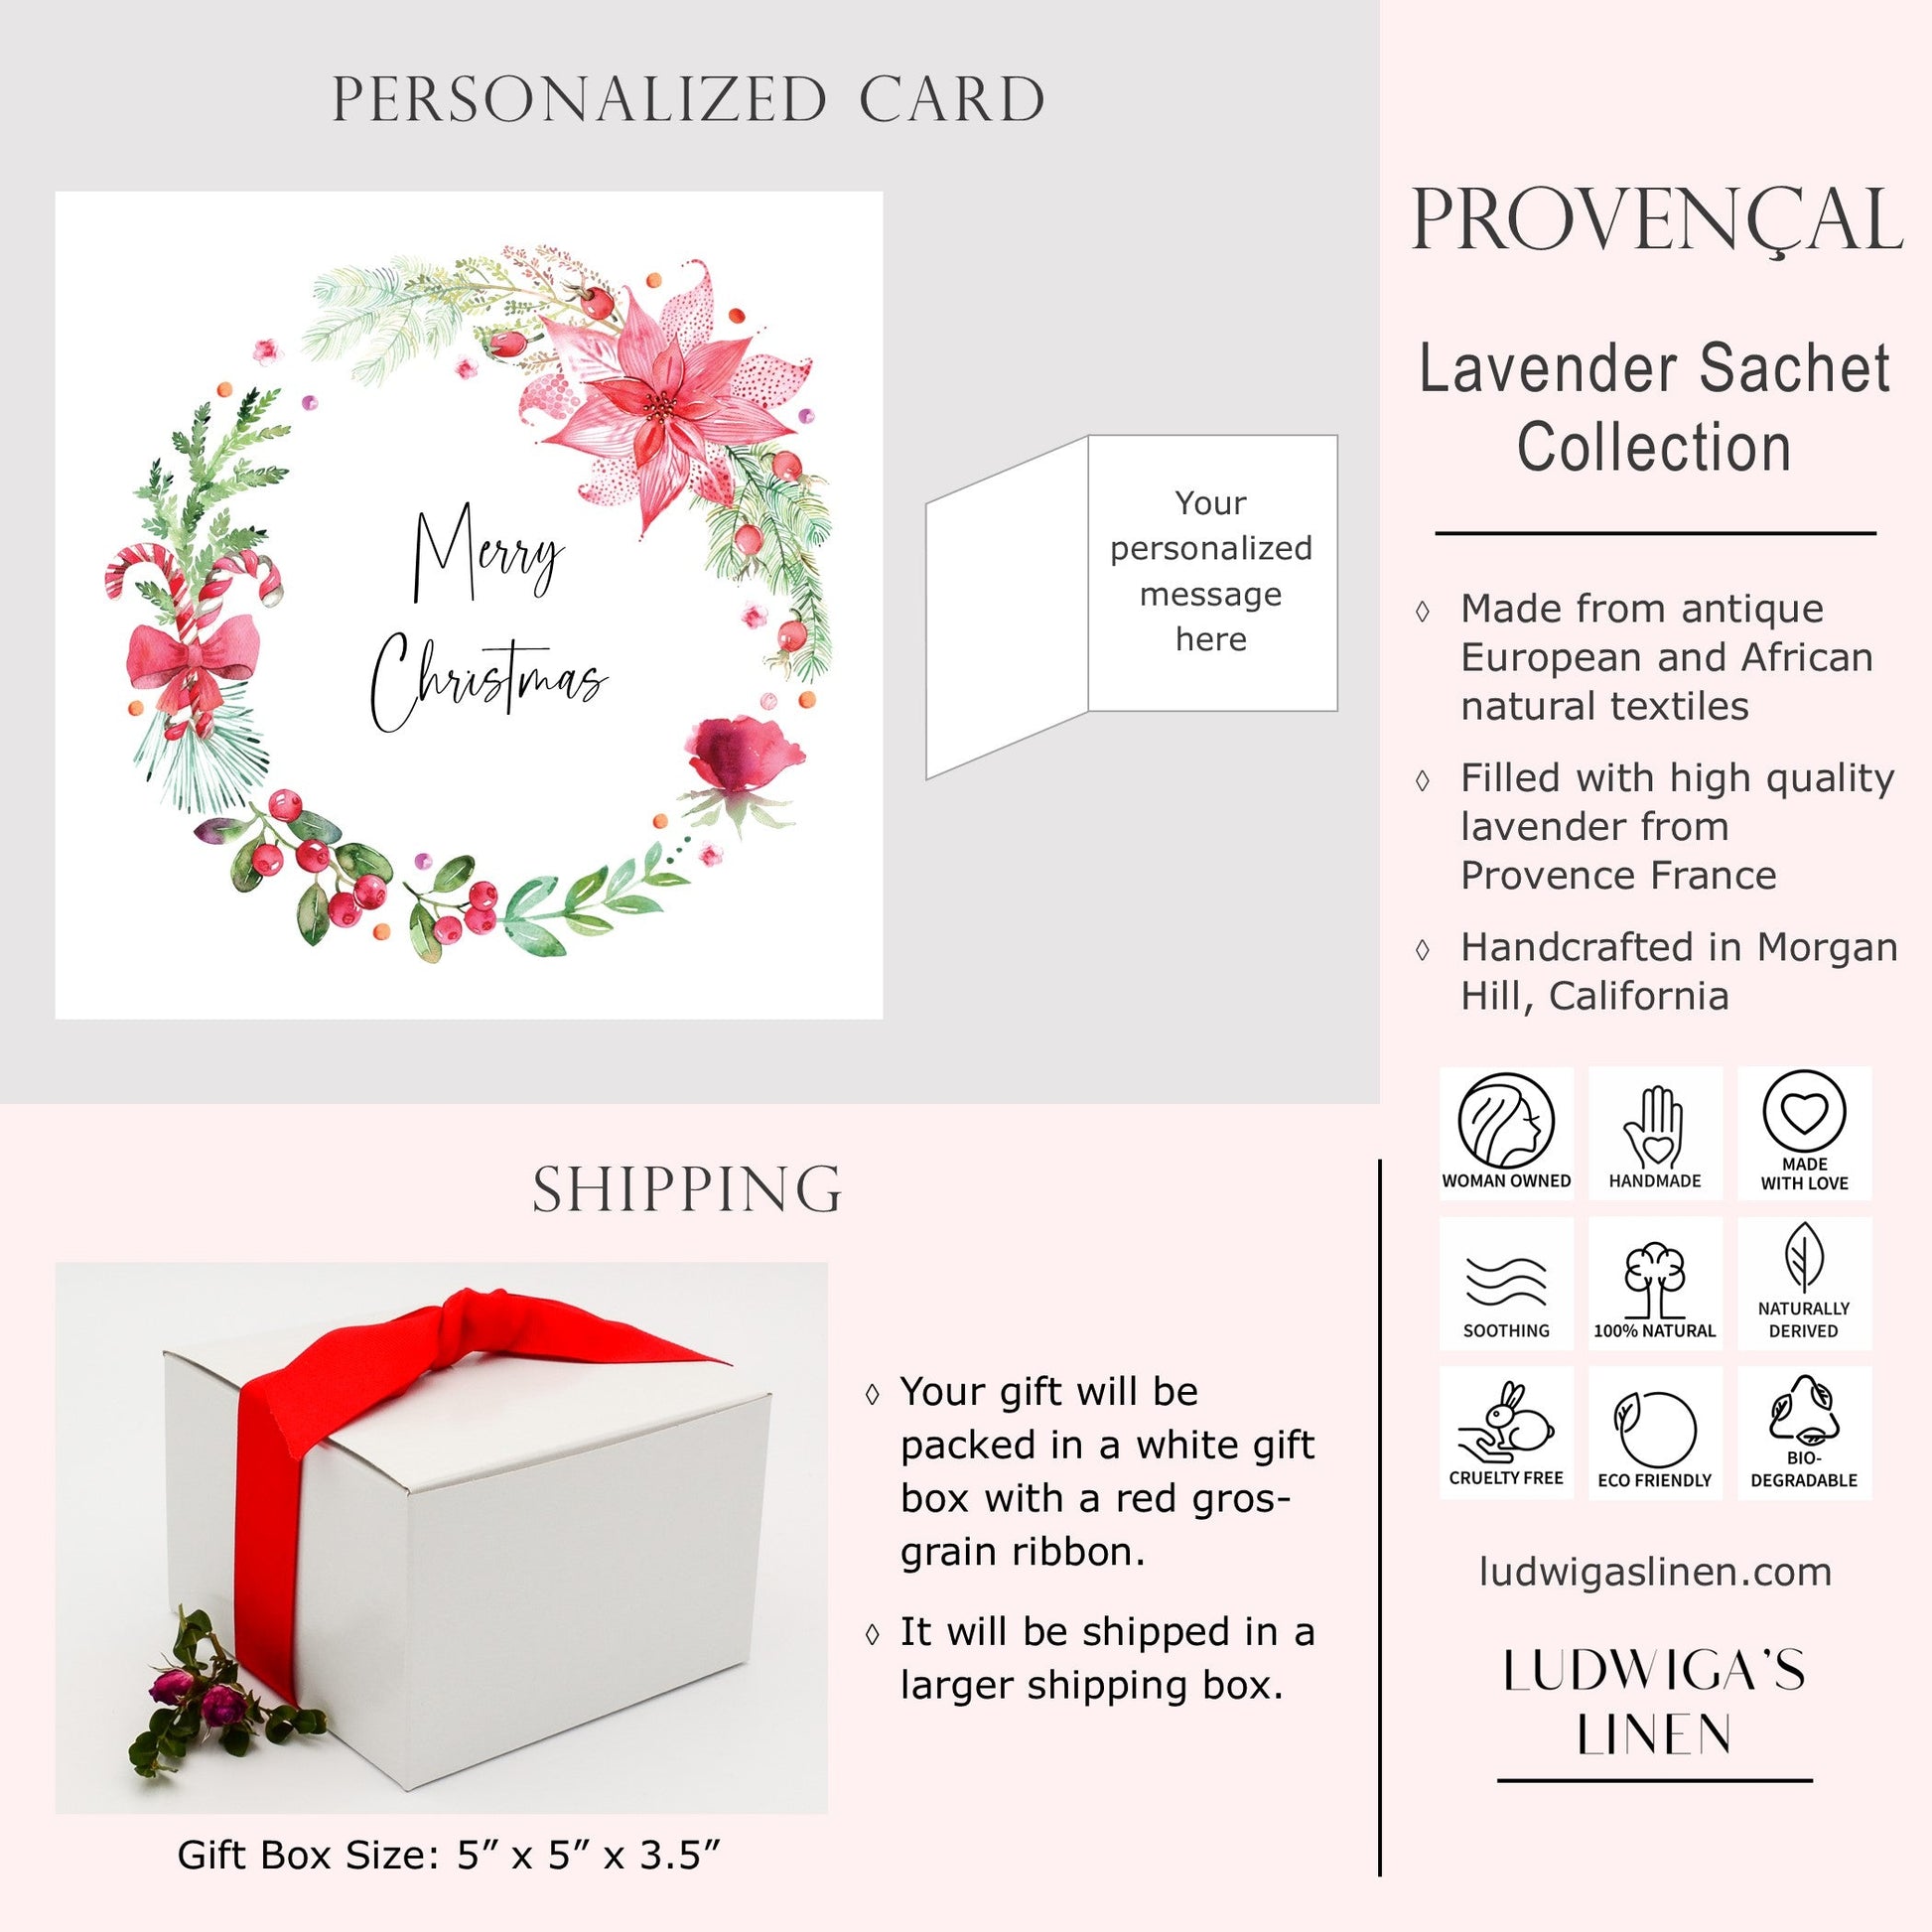 Gift box with red gros grain ribbon, personalized card, shipping and general information about Ludwiga's Linen Provençal sachet collection